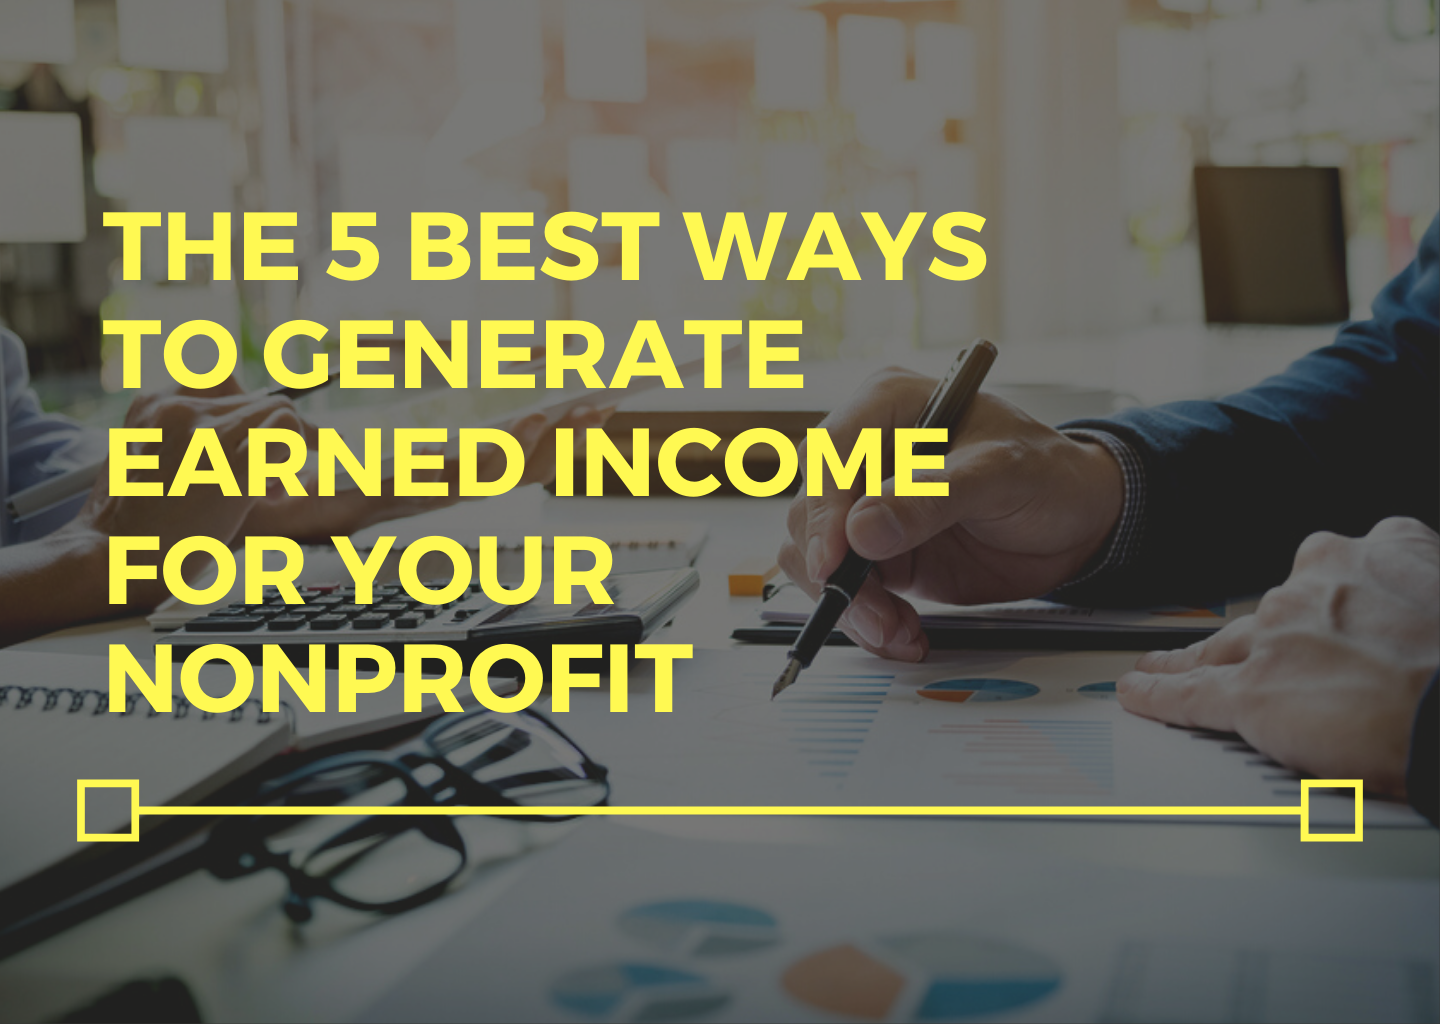 The 5 Best Ways to Generate Earned Income for Your Nonprofit